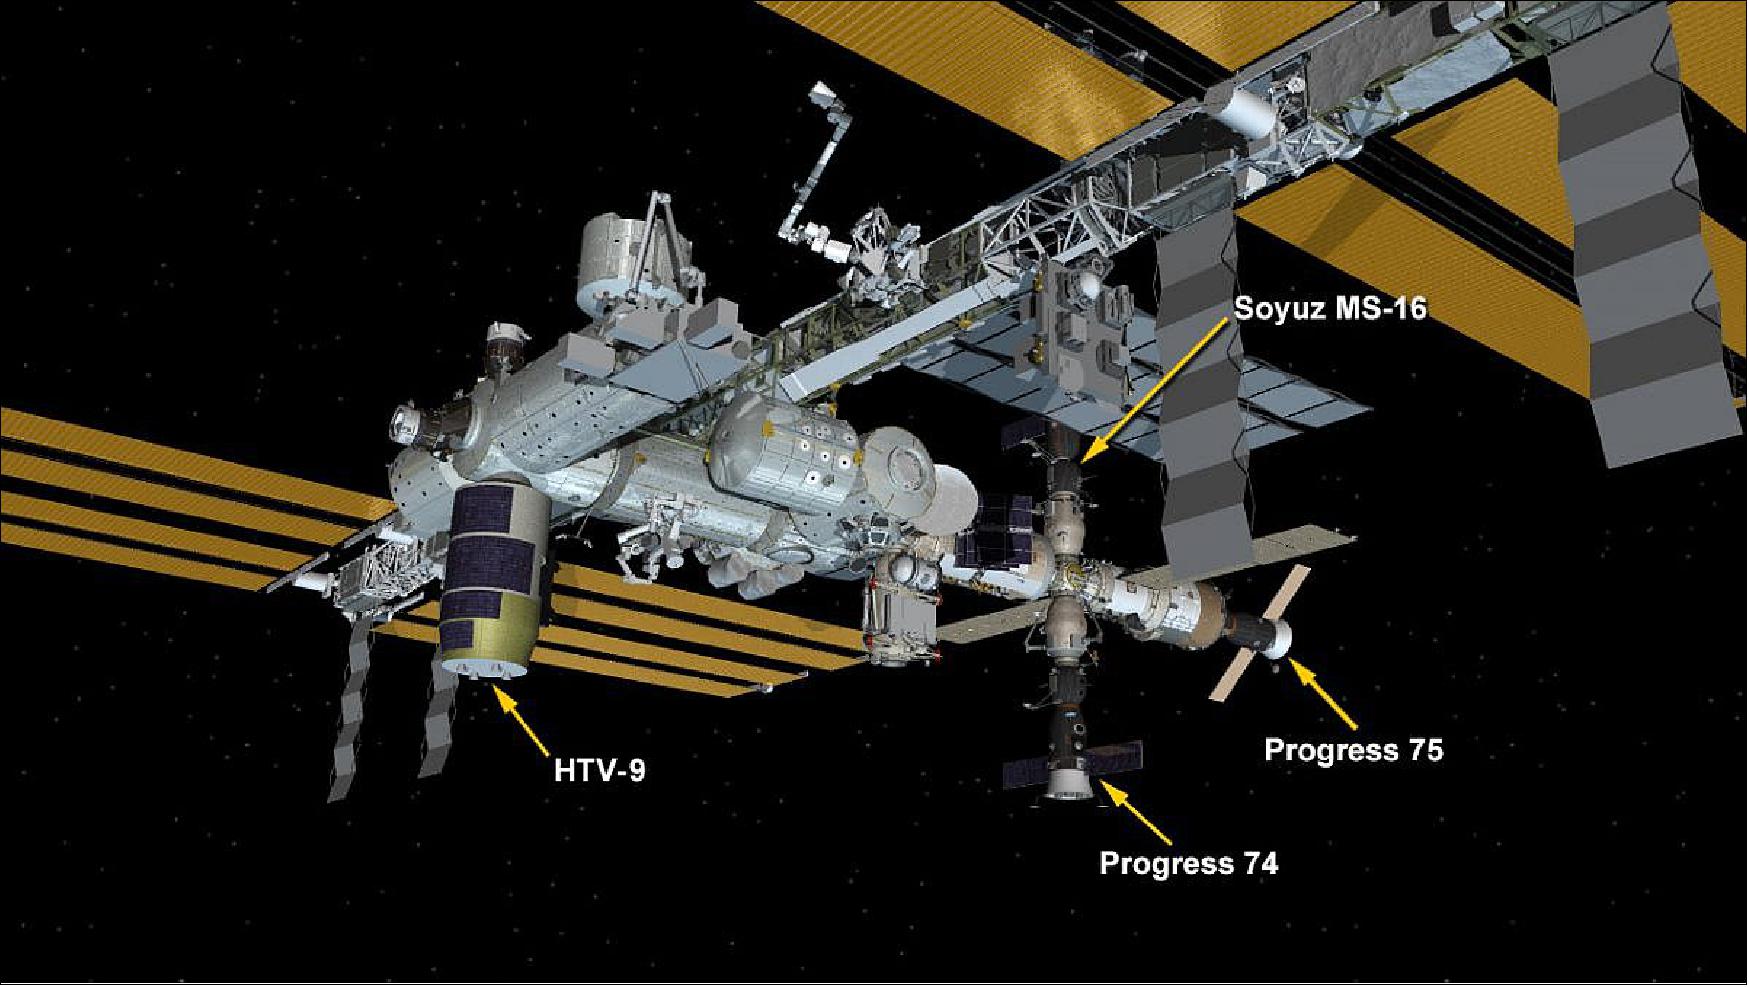 Figure 14: May 25, 2020: International Space Station Configuration. Four spaceships are parked at the space station including the HTV-9 resupply ship from JAXA (Japan Aerospace Exploration Agency) and Russia’s Progress 74 and 75 resupply ships and Soyuz MS-16 crew ship (image credit: NASA)